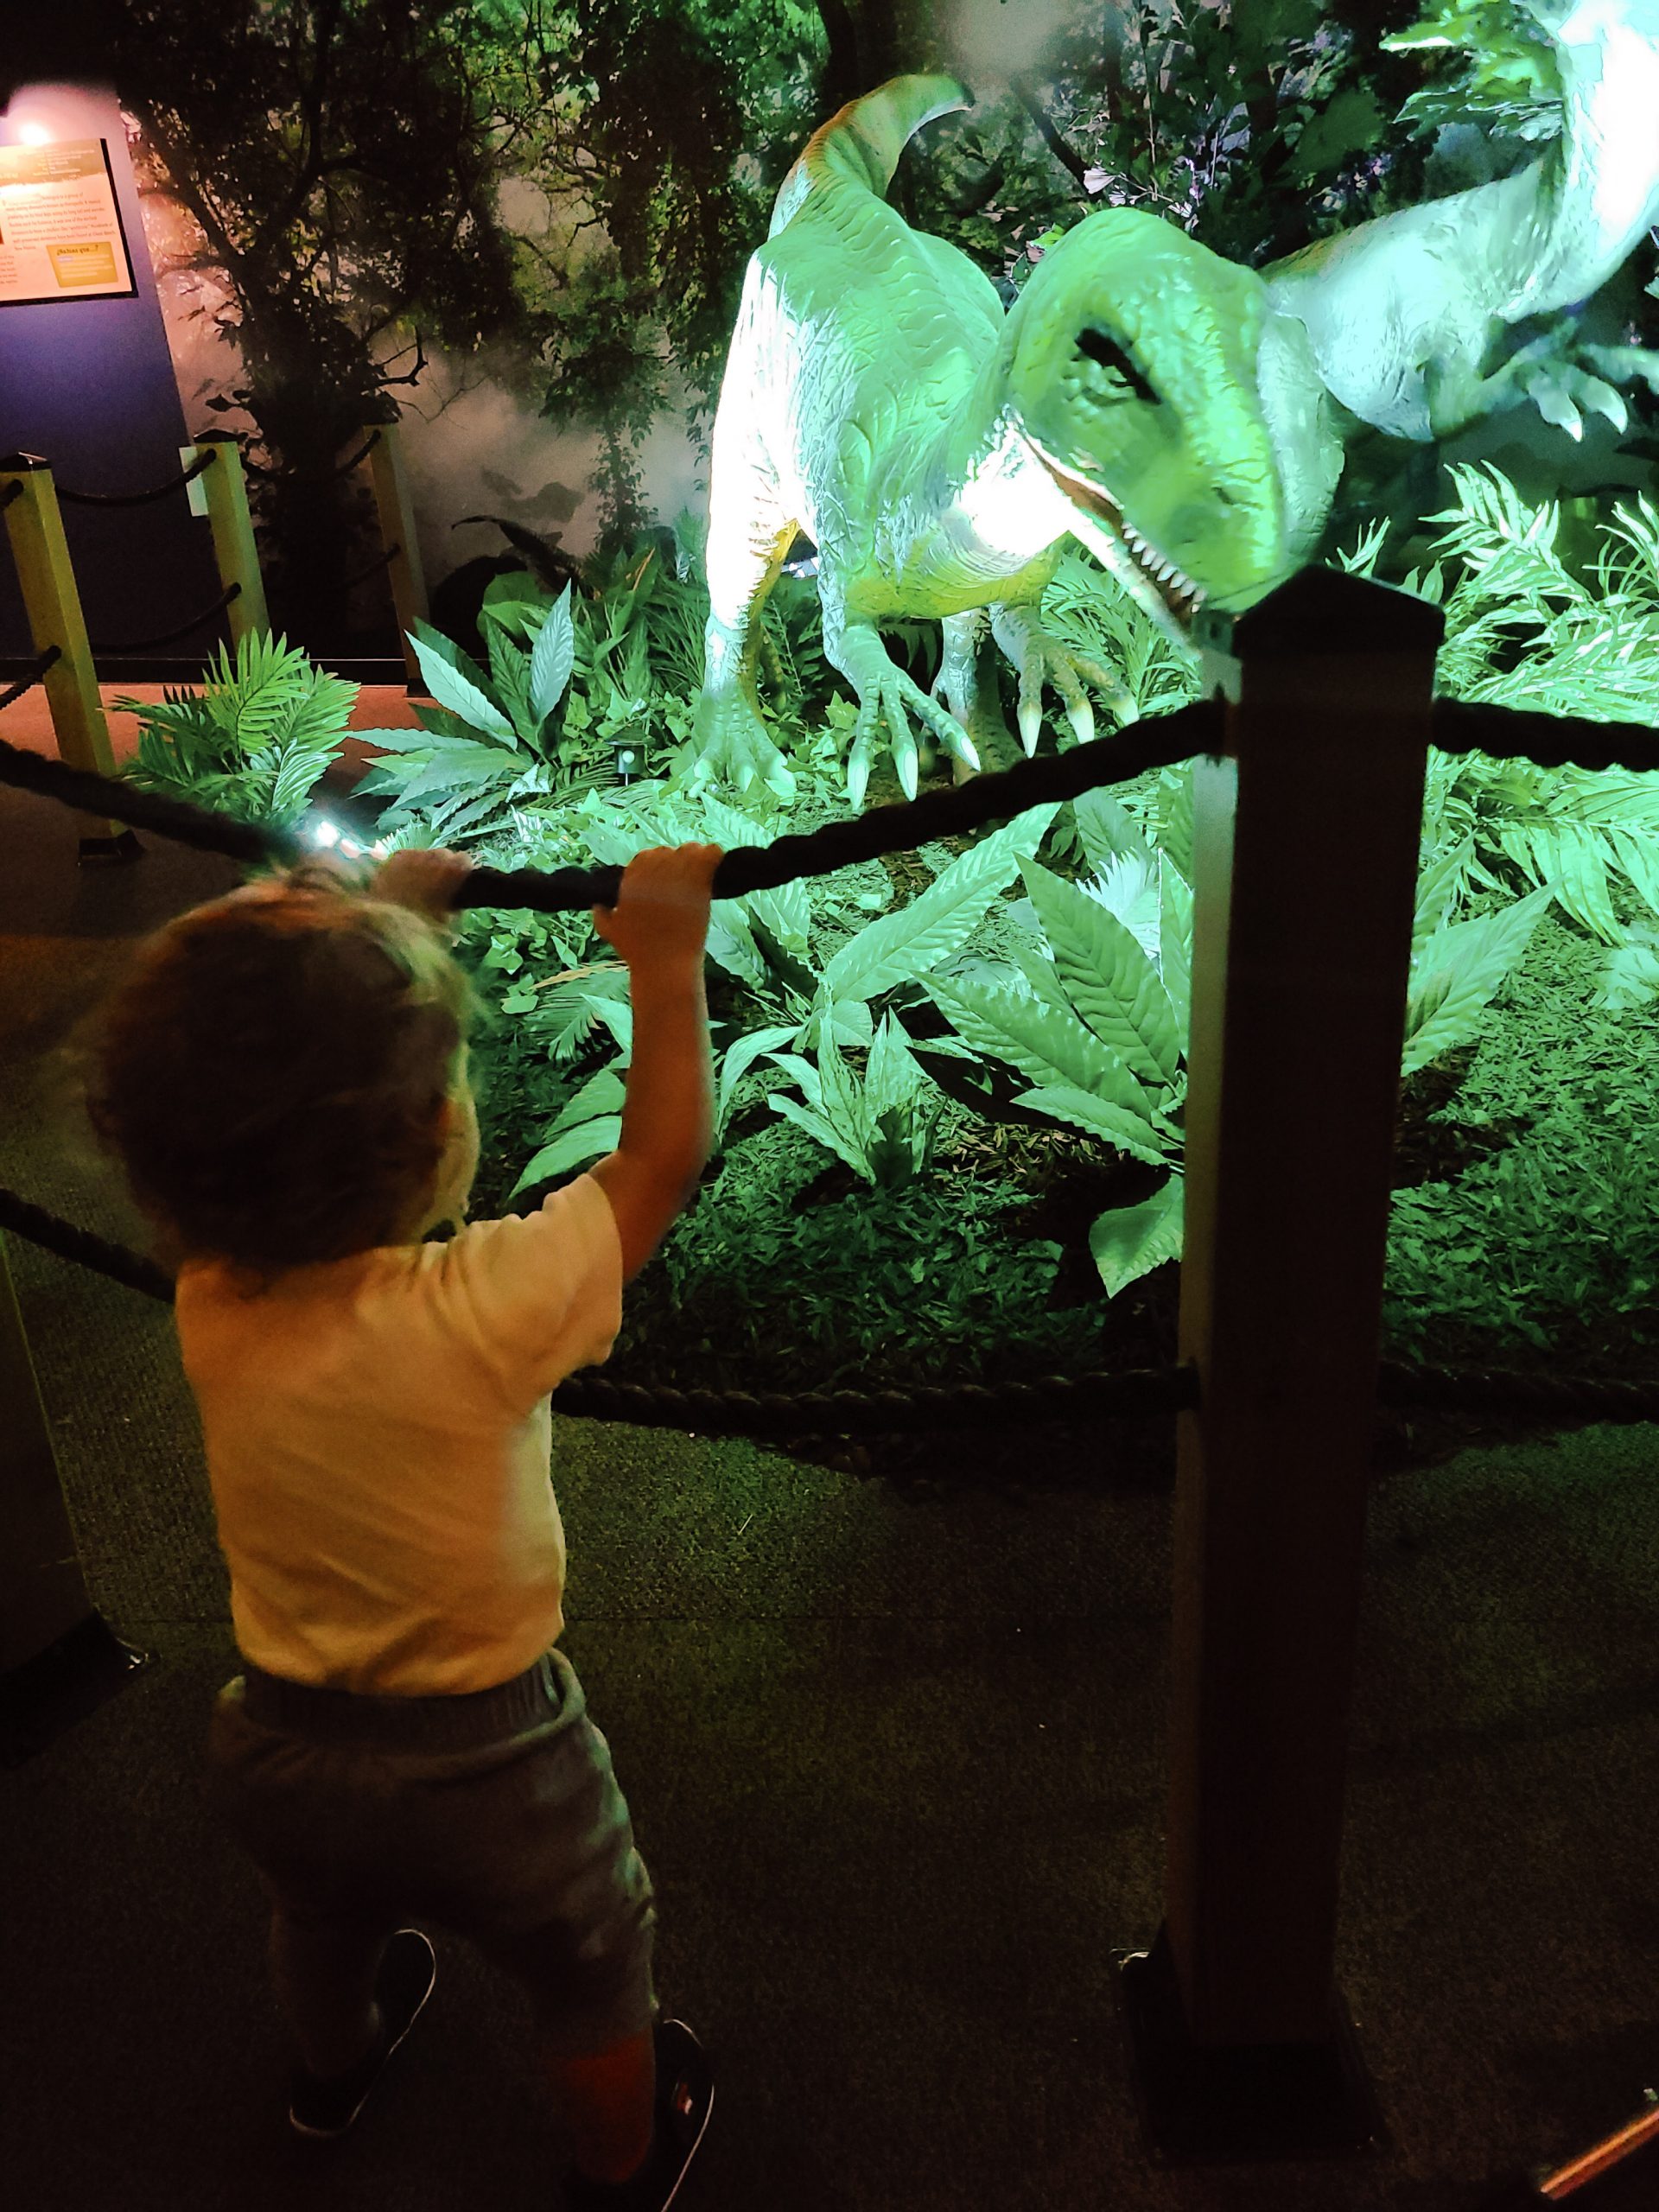 A child looking at a dinosaur exhibit at a museum